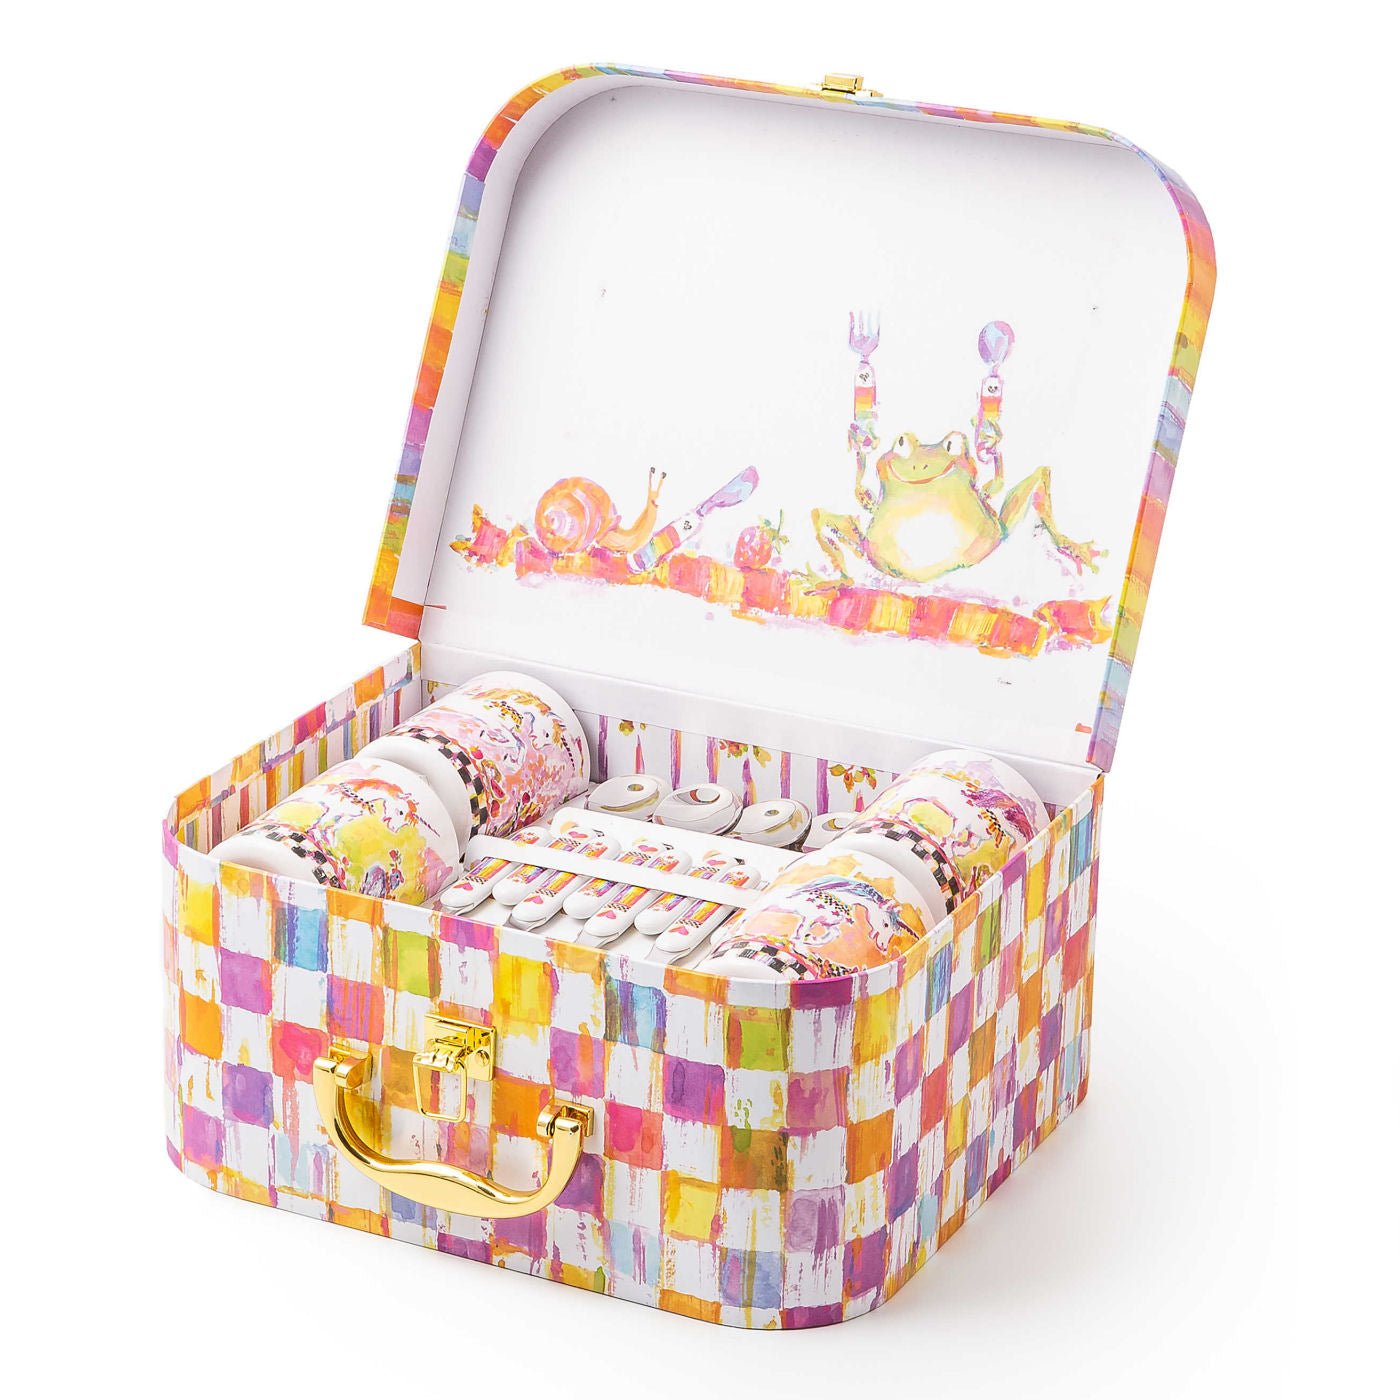 Magical Unicorn Picnic Set by Mackenzie-Childs - |VESIMI Design| Luxury and Rustic bathrooms online